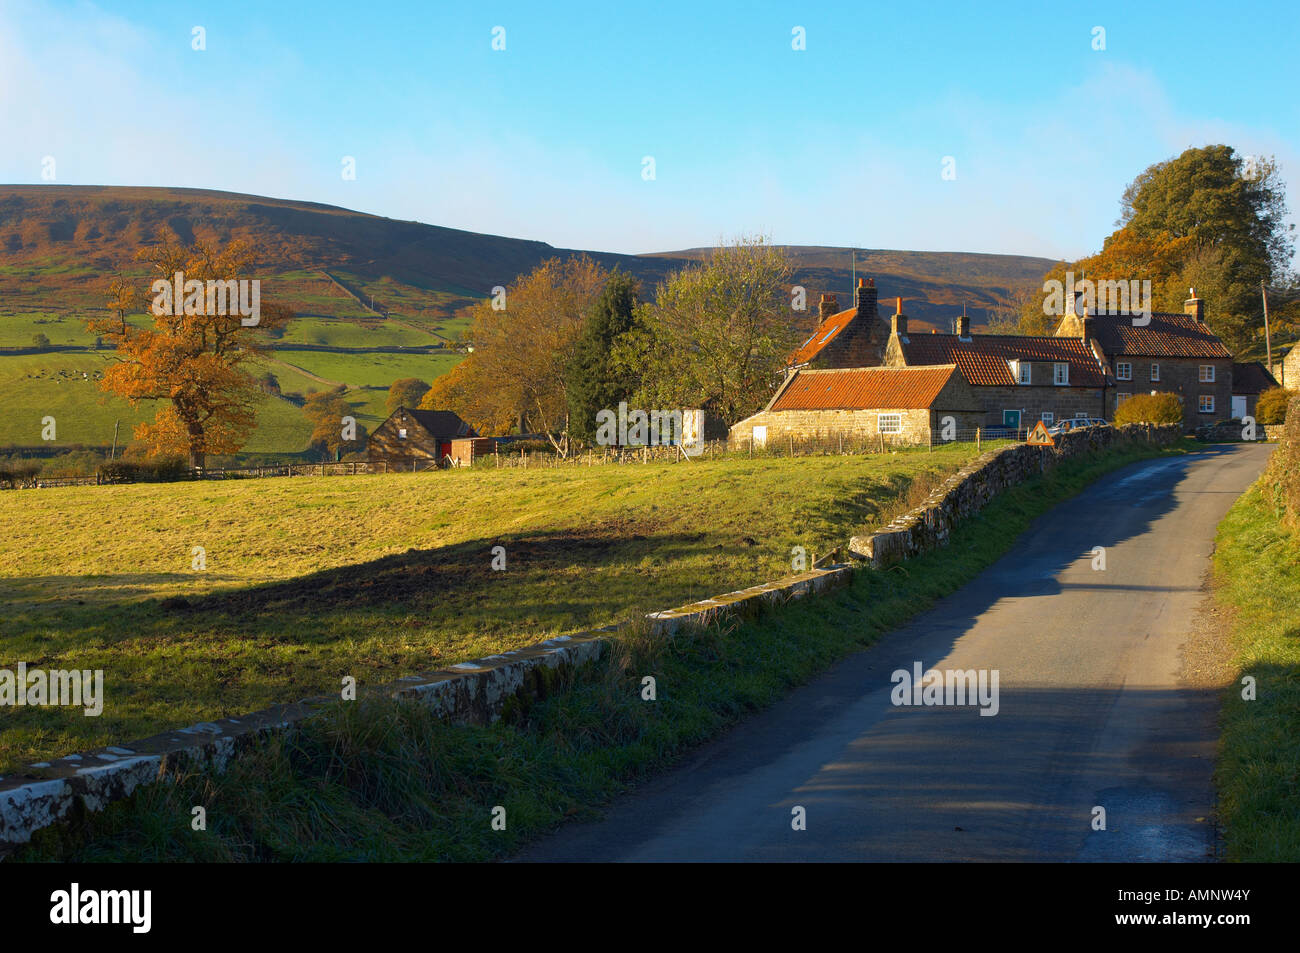 Traditional Yorkshire village in a dale in the moors. Church Houses Farndale North Yorkshire Moors National Park England Stock Photo